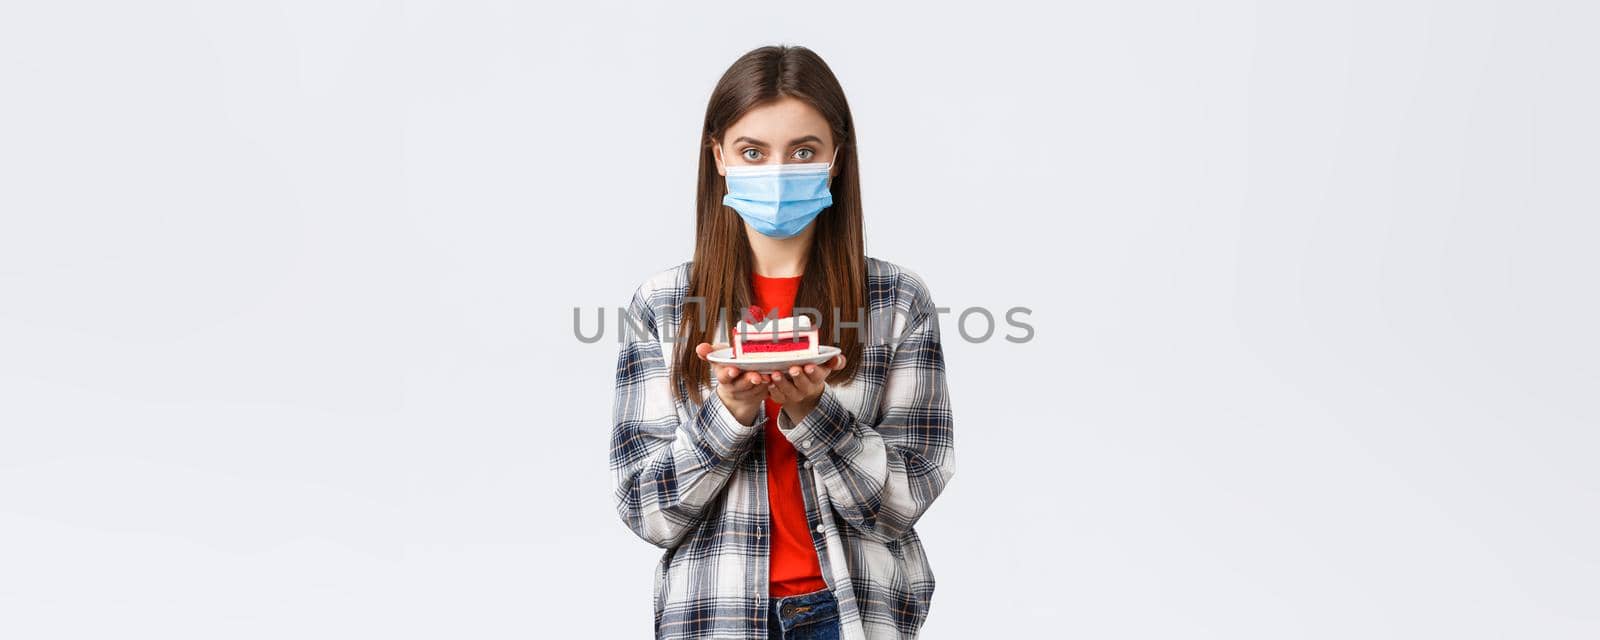 Coronavirus outbreak, lifestyle during social distancing and holidays celebration concept. Young cute girl in medical mask and casual outfit, holding birthday cake and looking serious camera by Benzoix